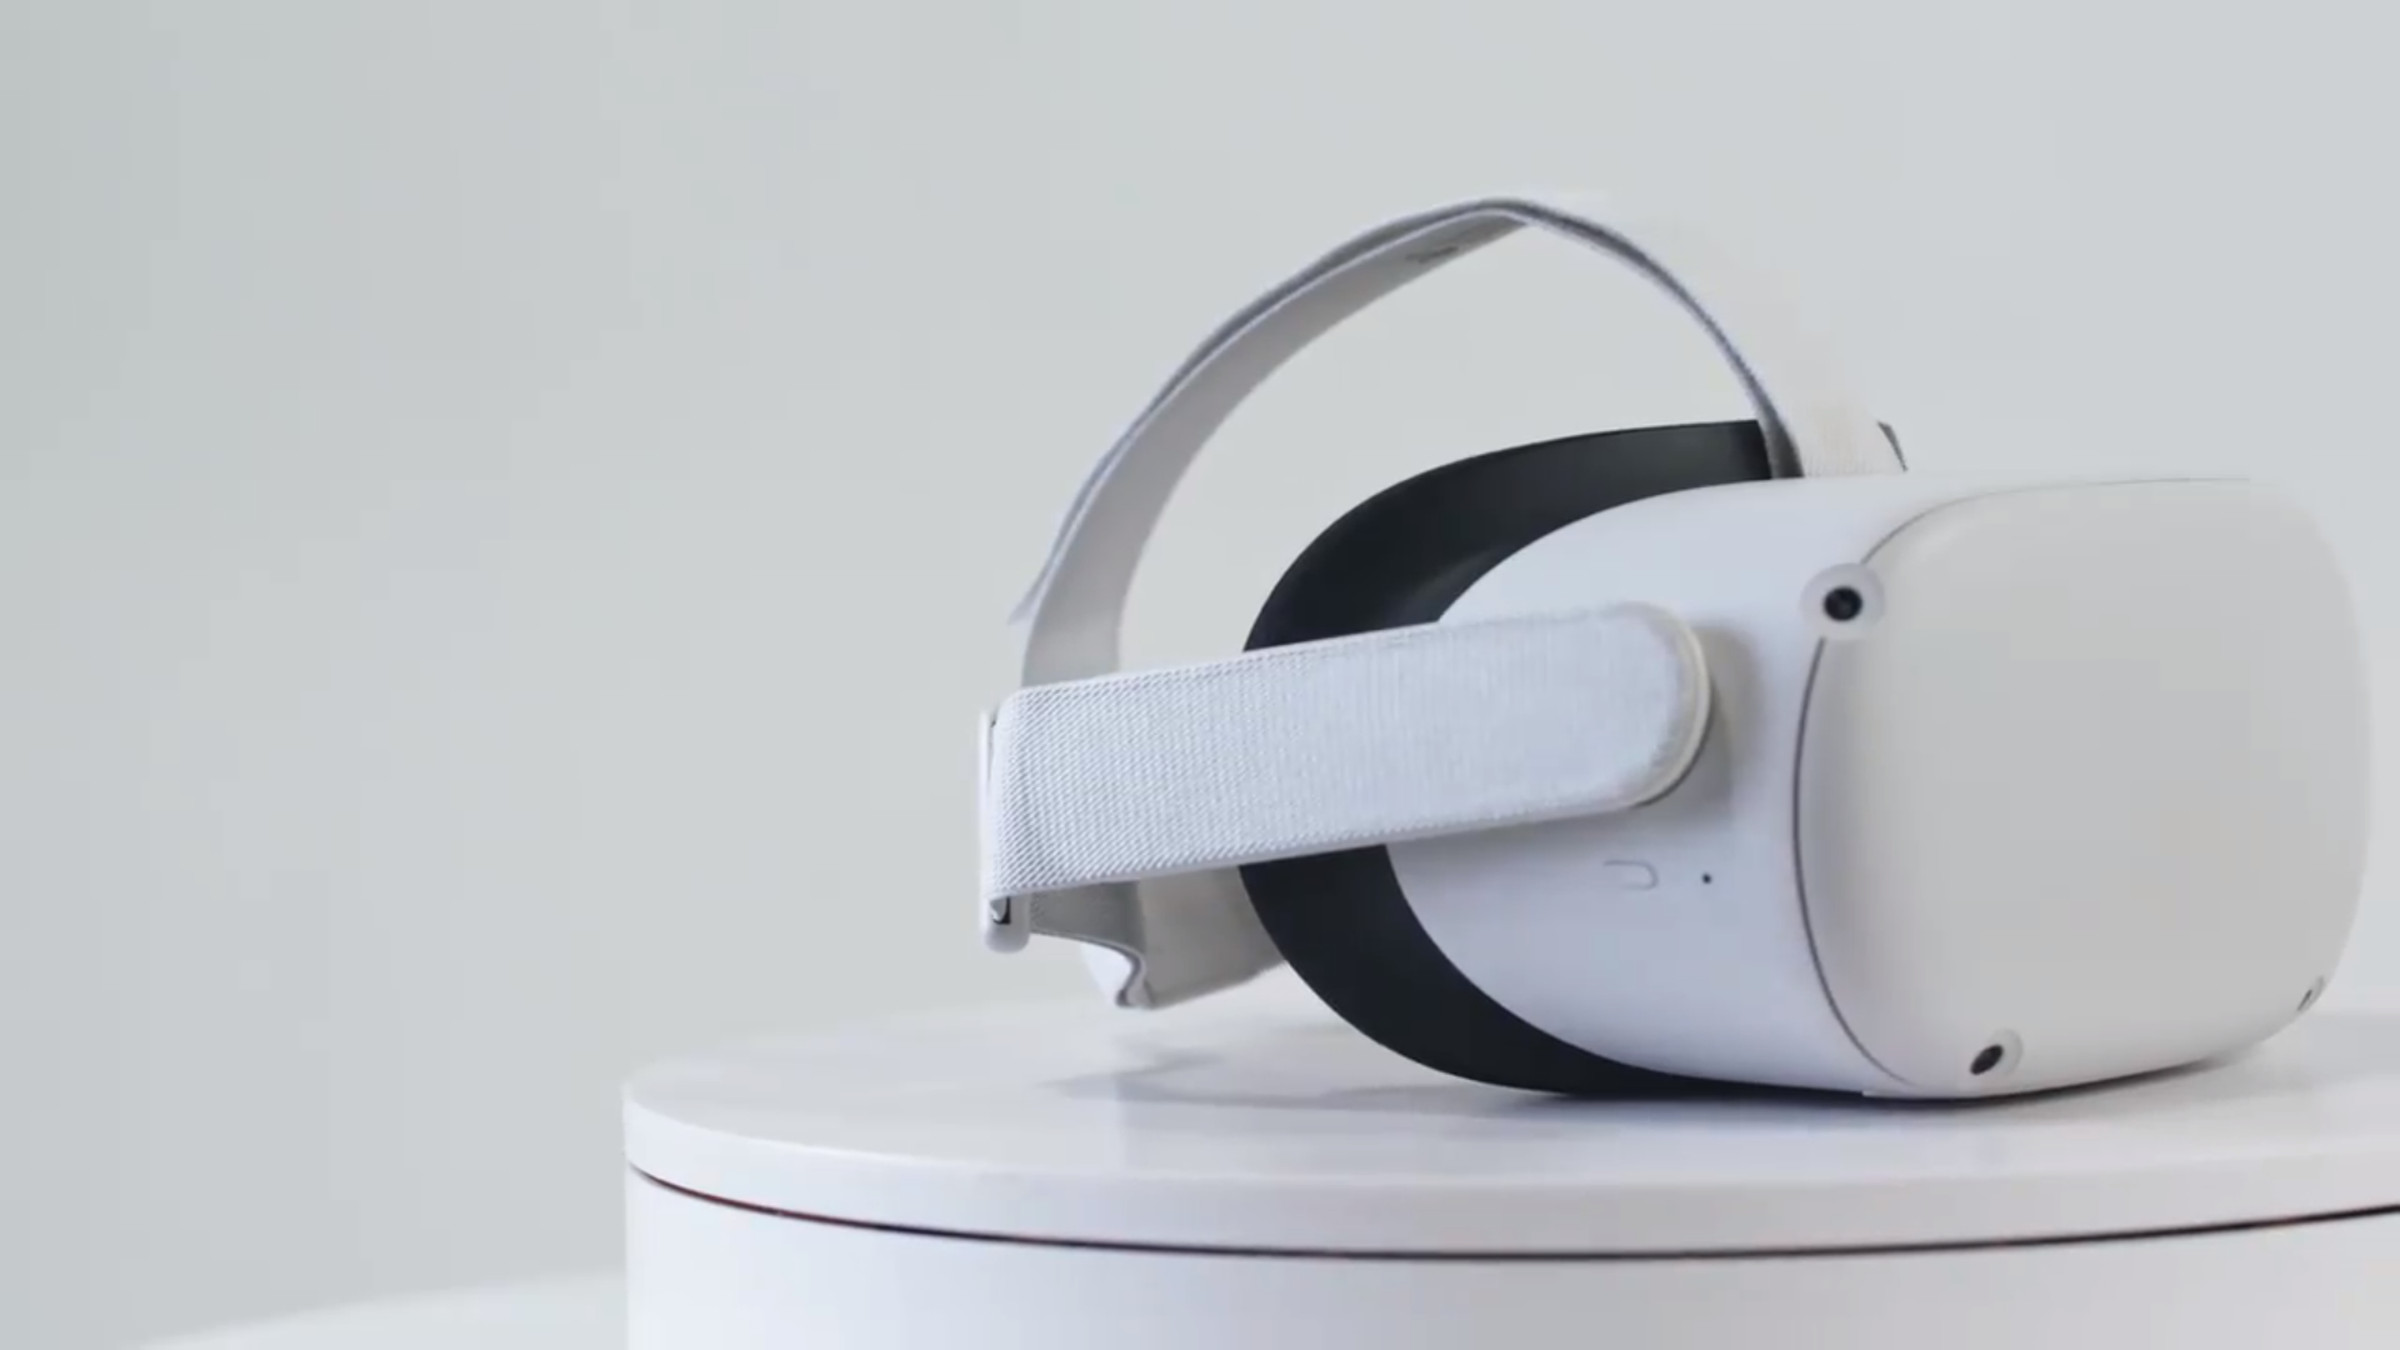 Previously, the headset had been rumored to launch on September 15th.